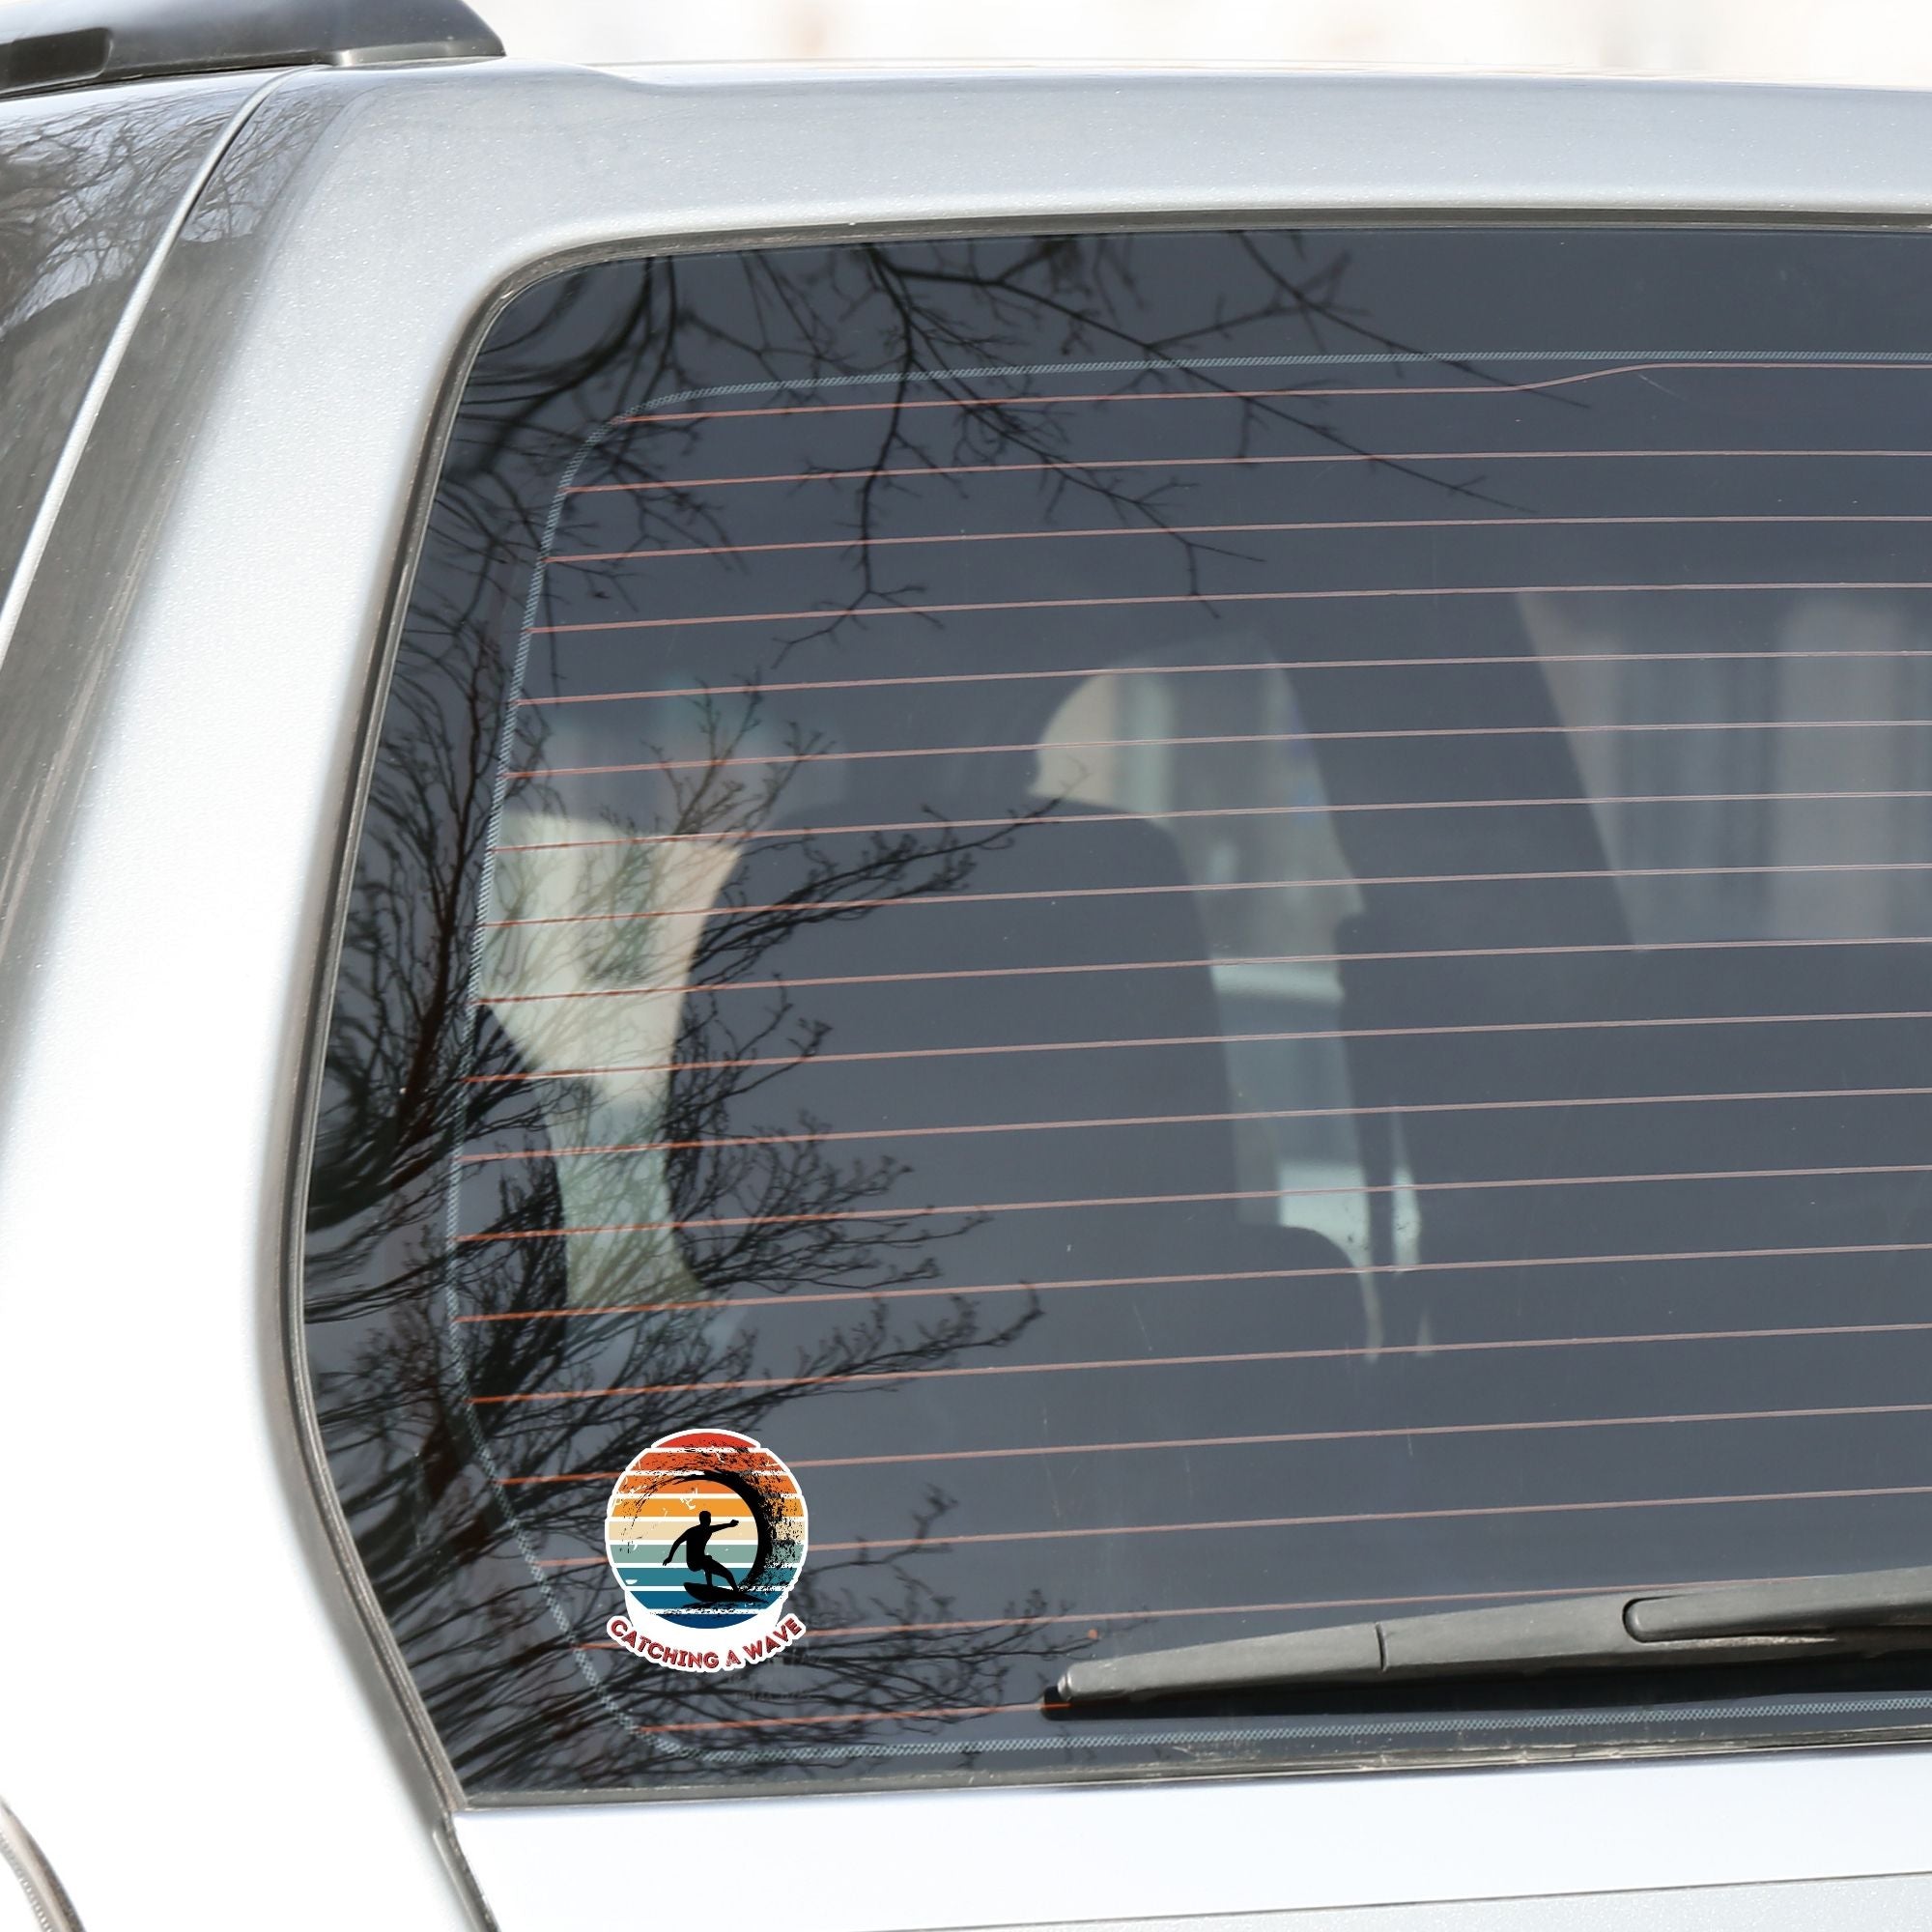 Hang 10 Bro! Catch a wave with this individual die-cut sticker featuring the silhouette of a male surfer inside the tube, all on a colored gradient background. Cowabunga!  This image shows the Catching a Wave die-cut sticker on the back window of a car.